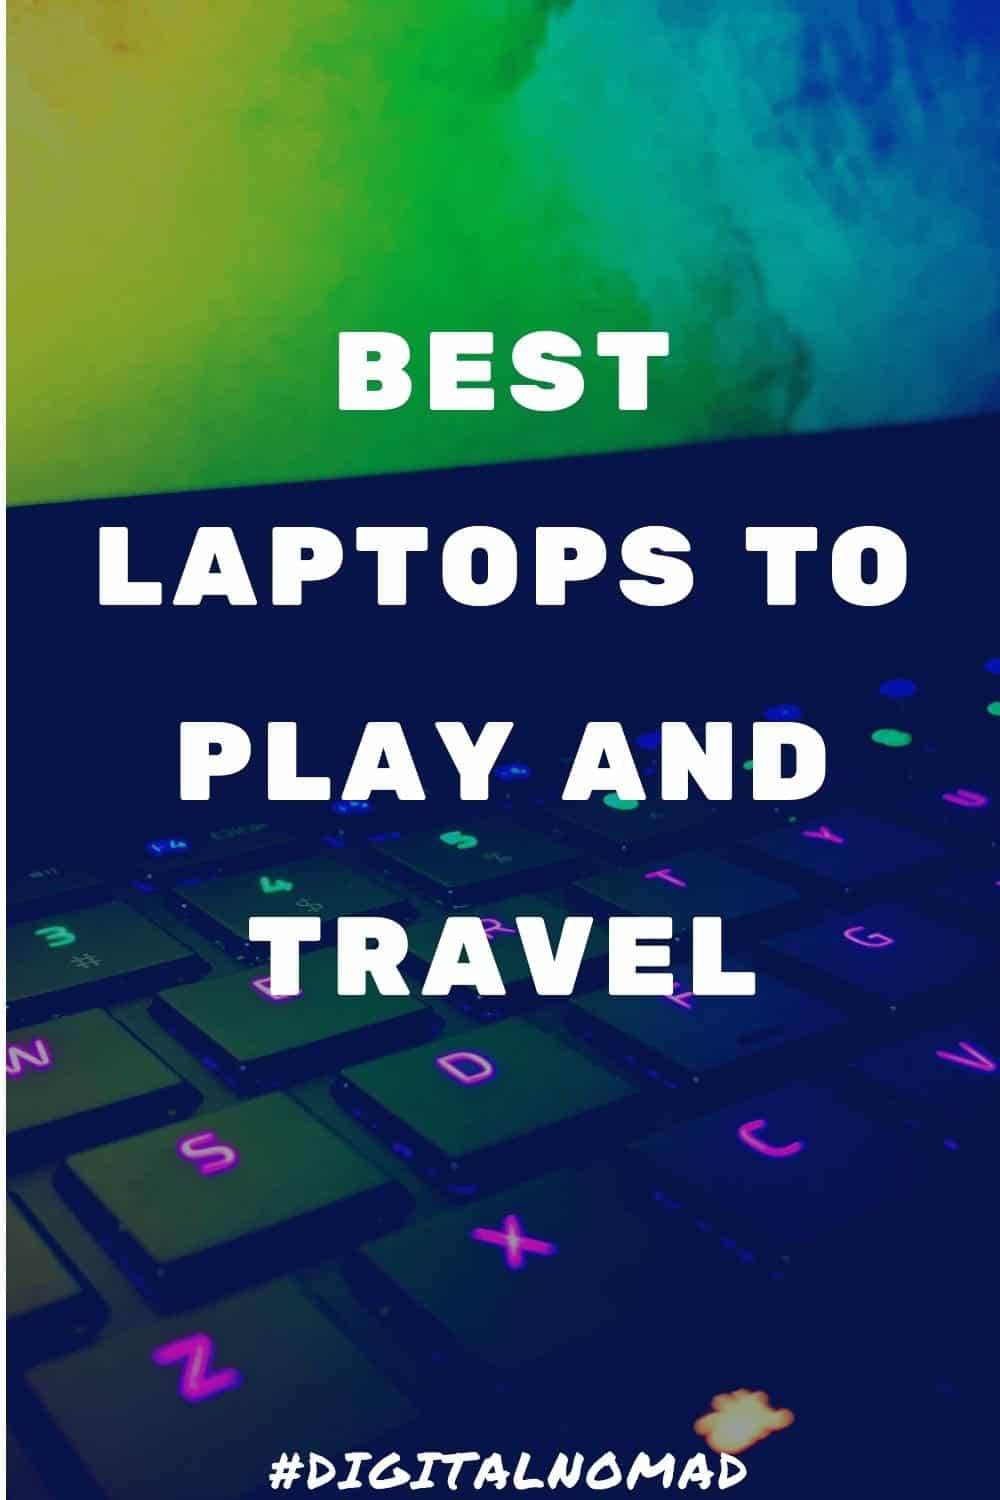 3 Best Light Laptops to Travel and Play (for nomads)